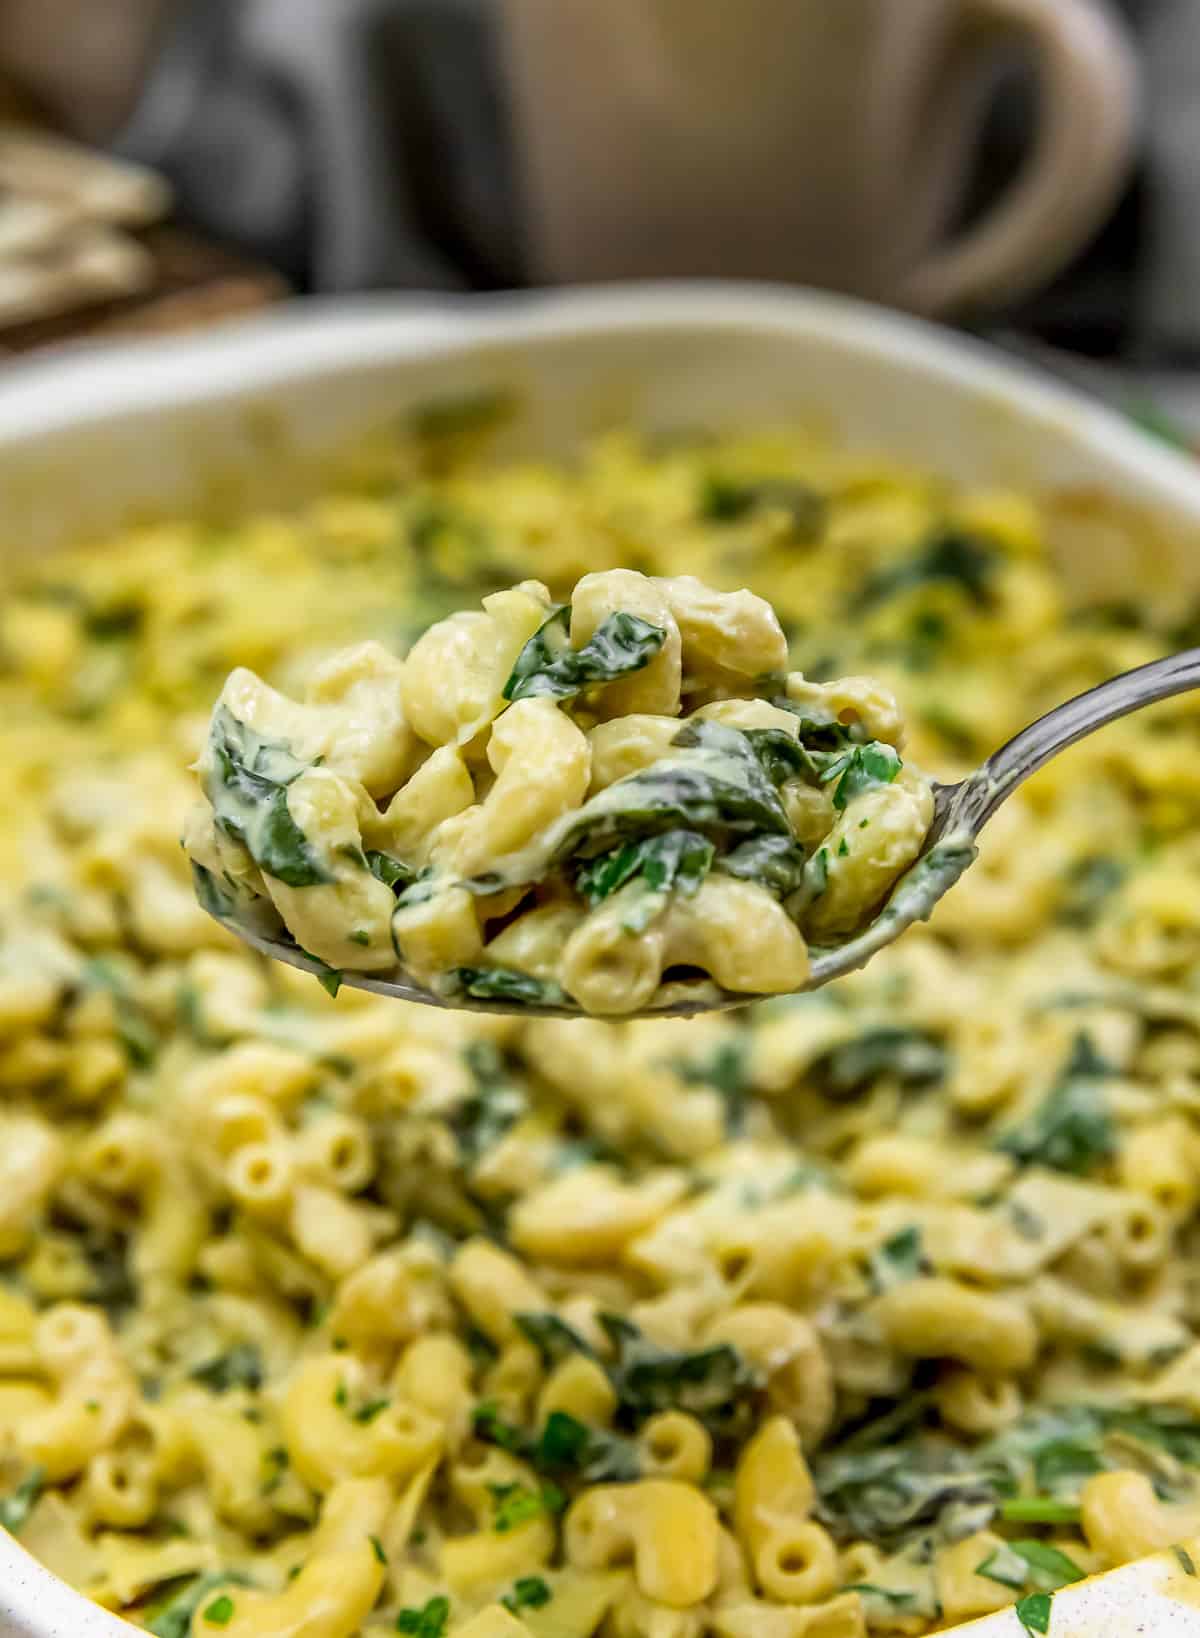 Spoonful of Vegan Spinach Artichoke Mac and Cheese